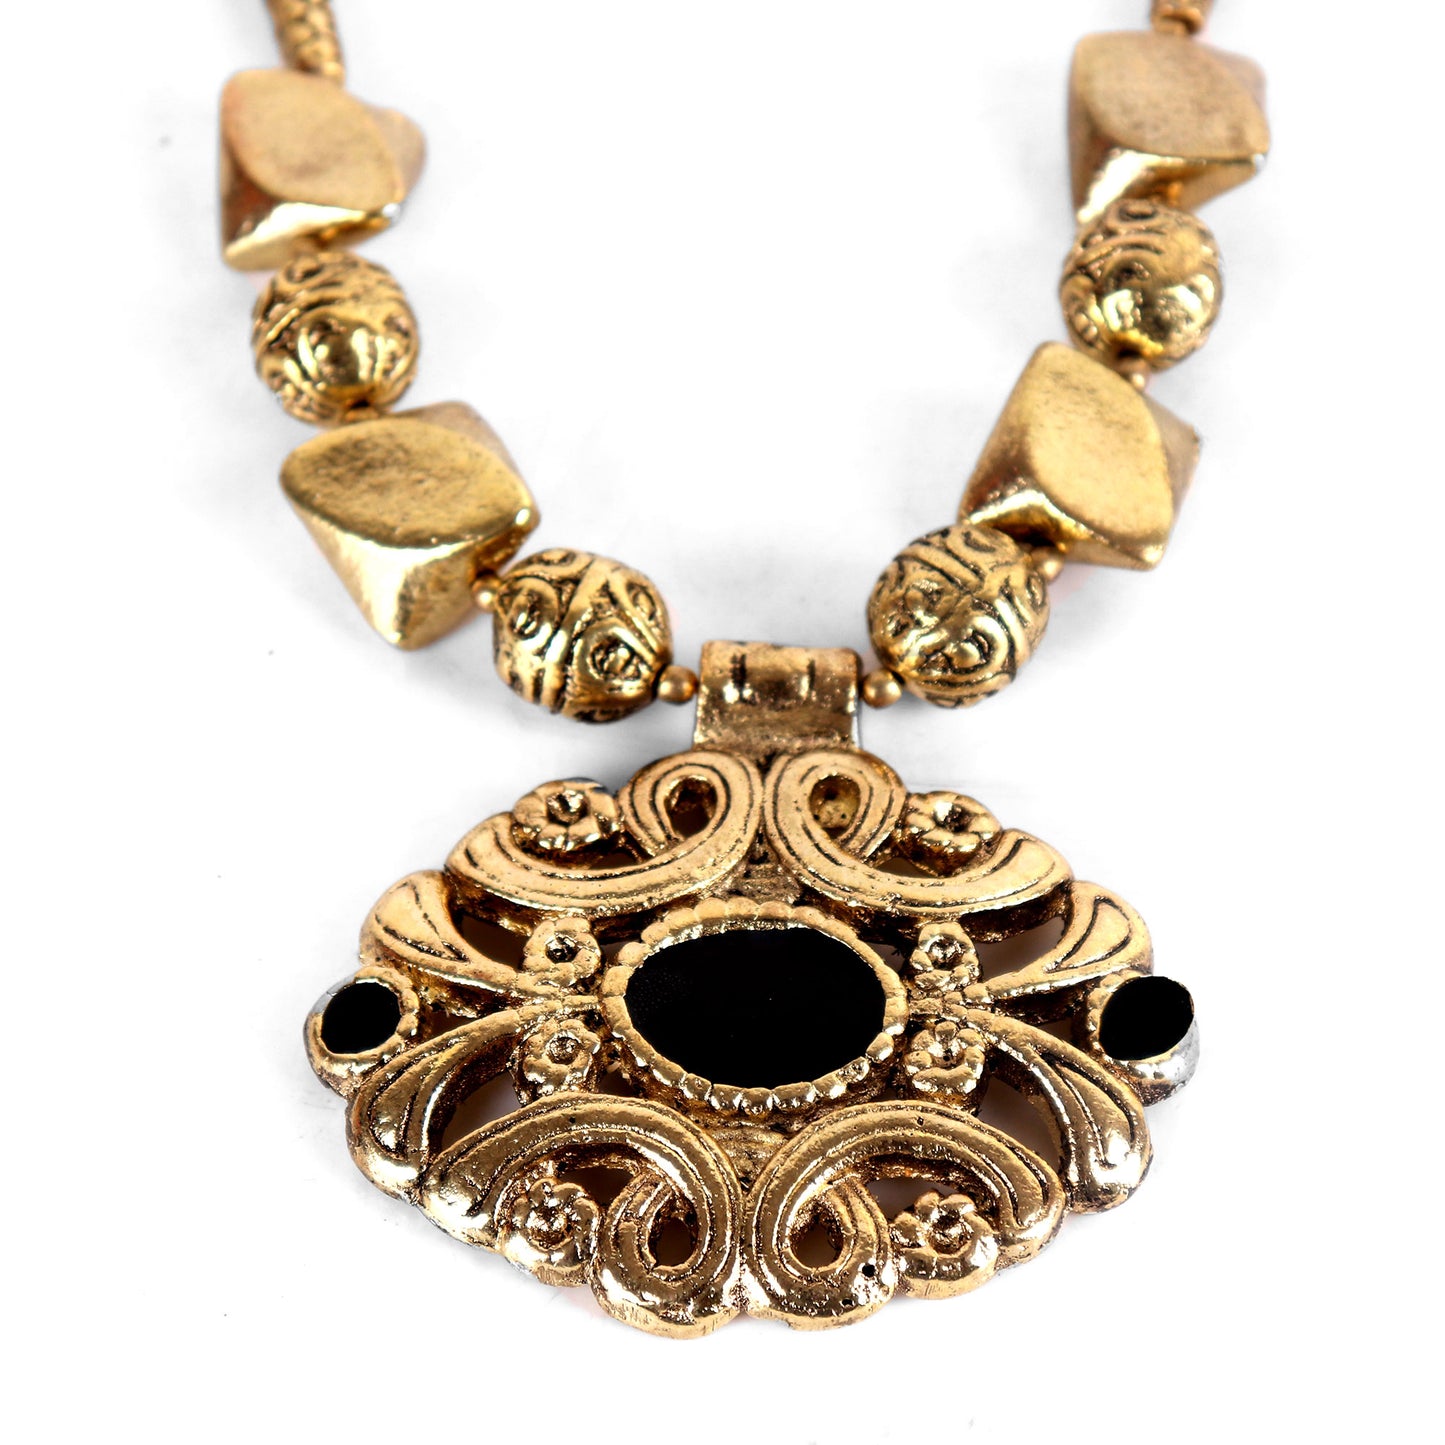 Necklace,All for Beauty Golden Necklace - Cippele Multi Store